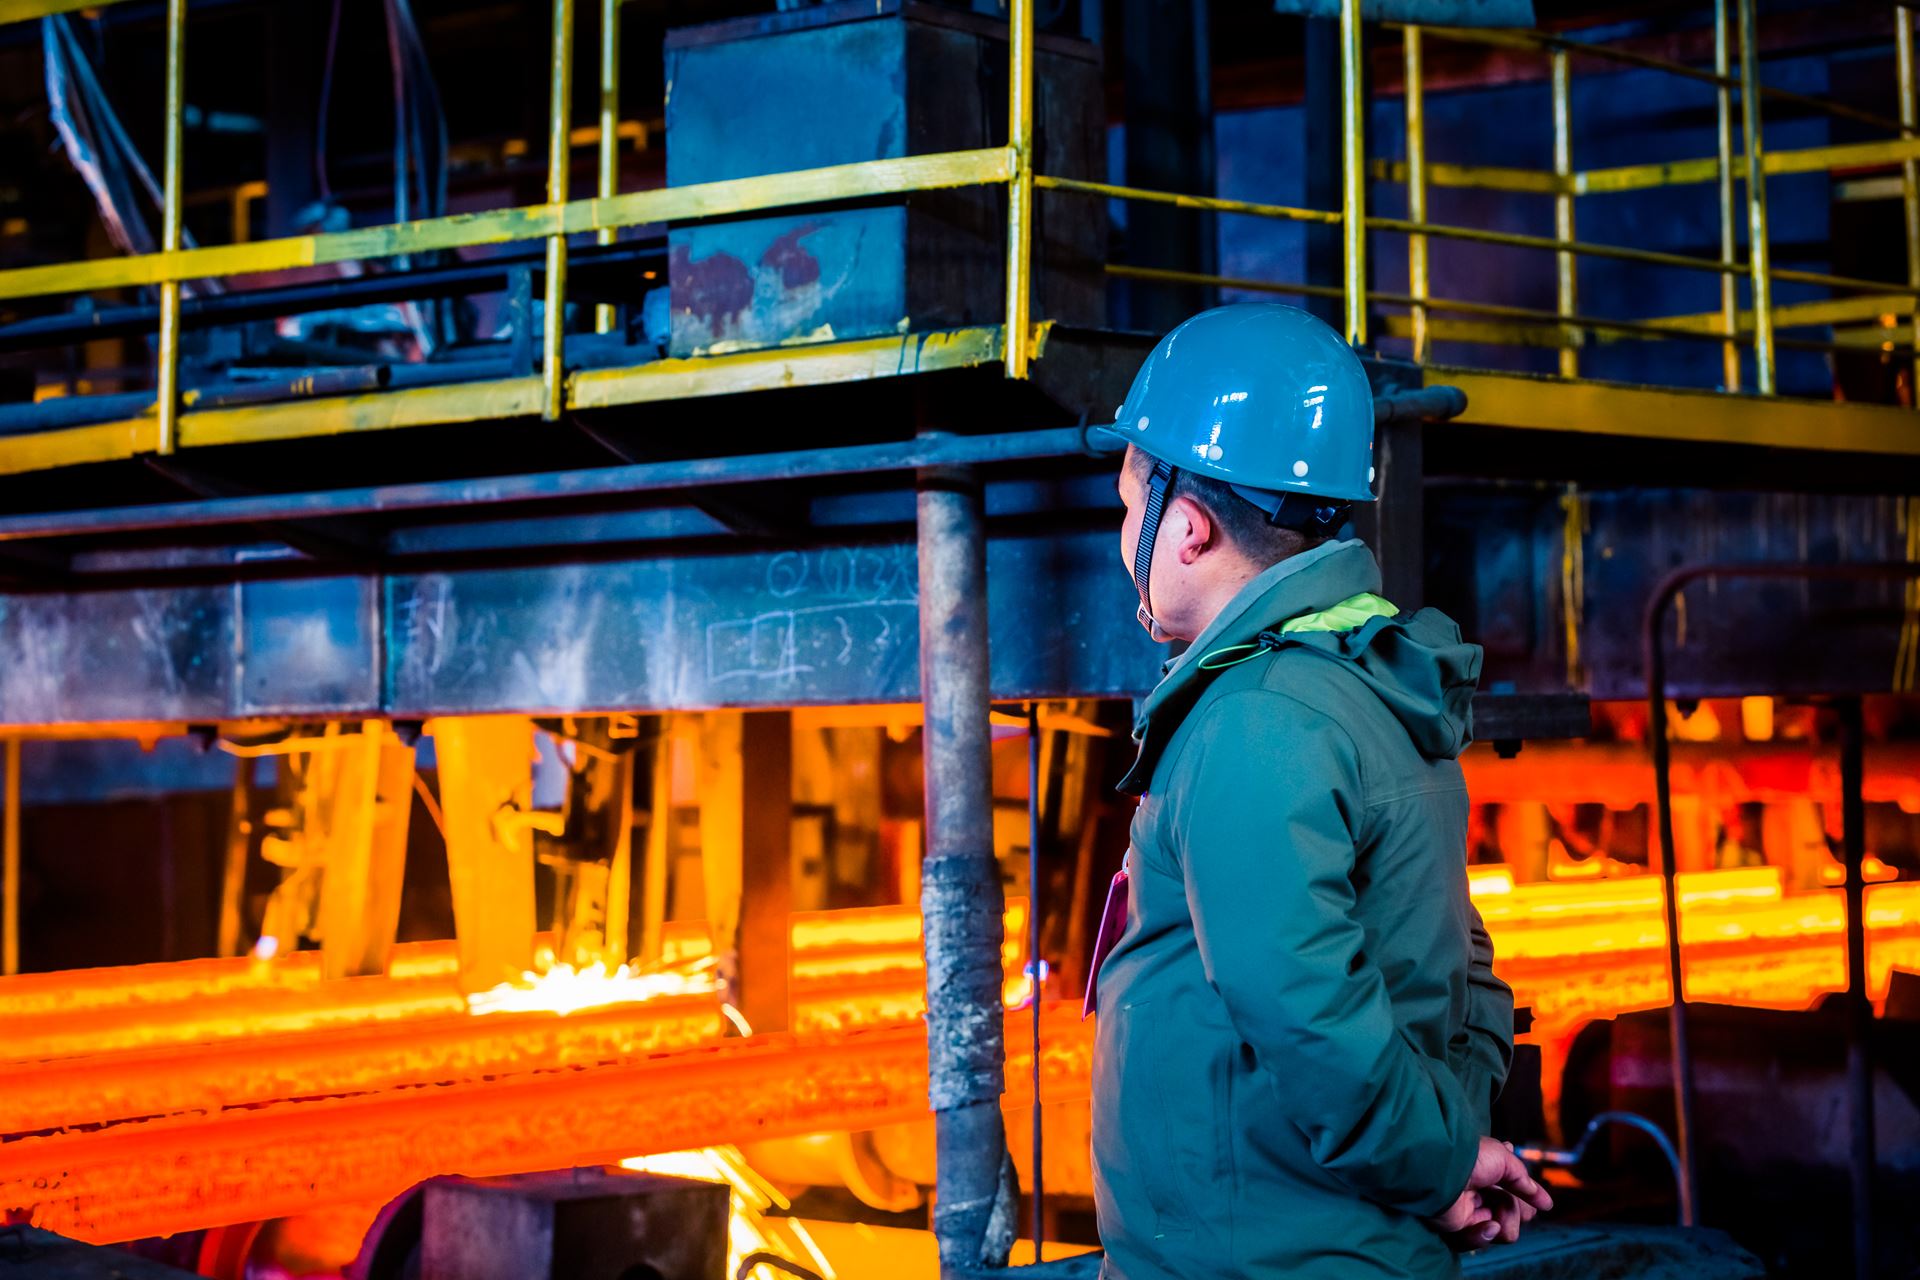 South Korea's crude steel production fell in April